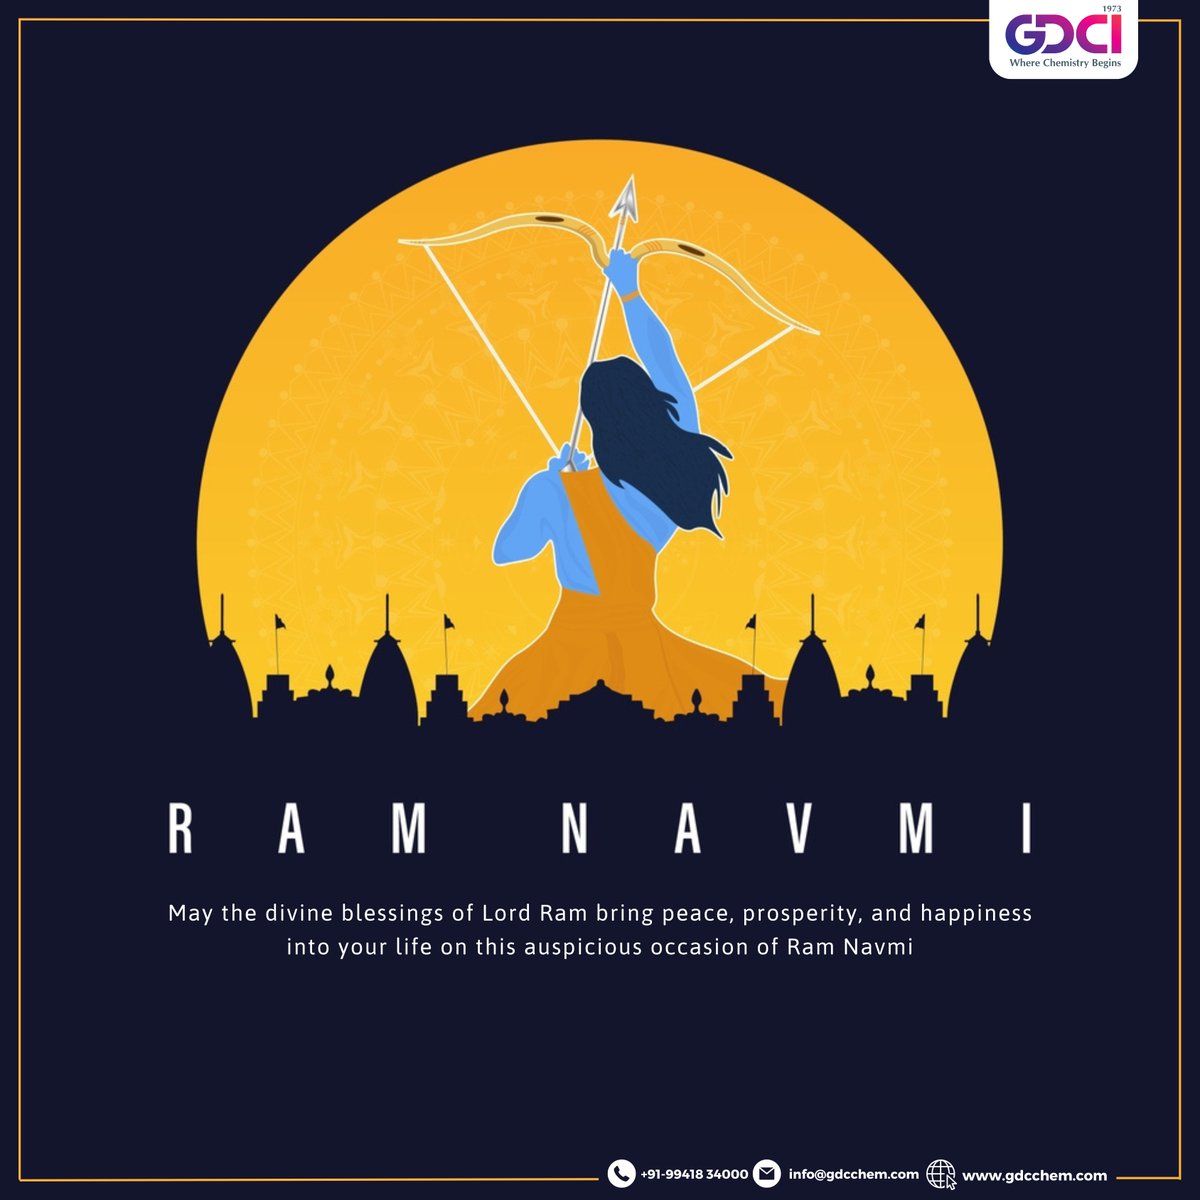 On this auspicious occasion of Ram Navmi, may Lord Rama's teachings guide you towards righteousness and truth.!

#RamNavmi #JaiShreeRam #LordRama #DivineBlessings #SpiritualJourney #Happiness #Peace #Prosperity #Joy #BlessedDay #Harmony #Devotion #Strength #Courage #GDCIIndia